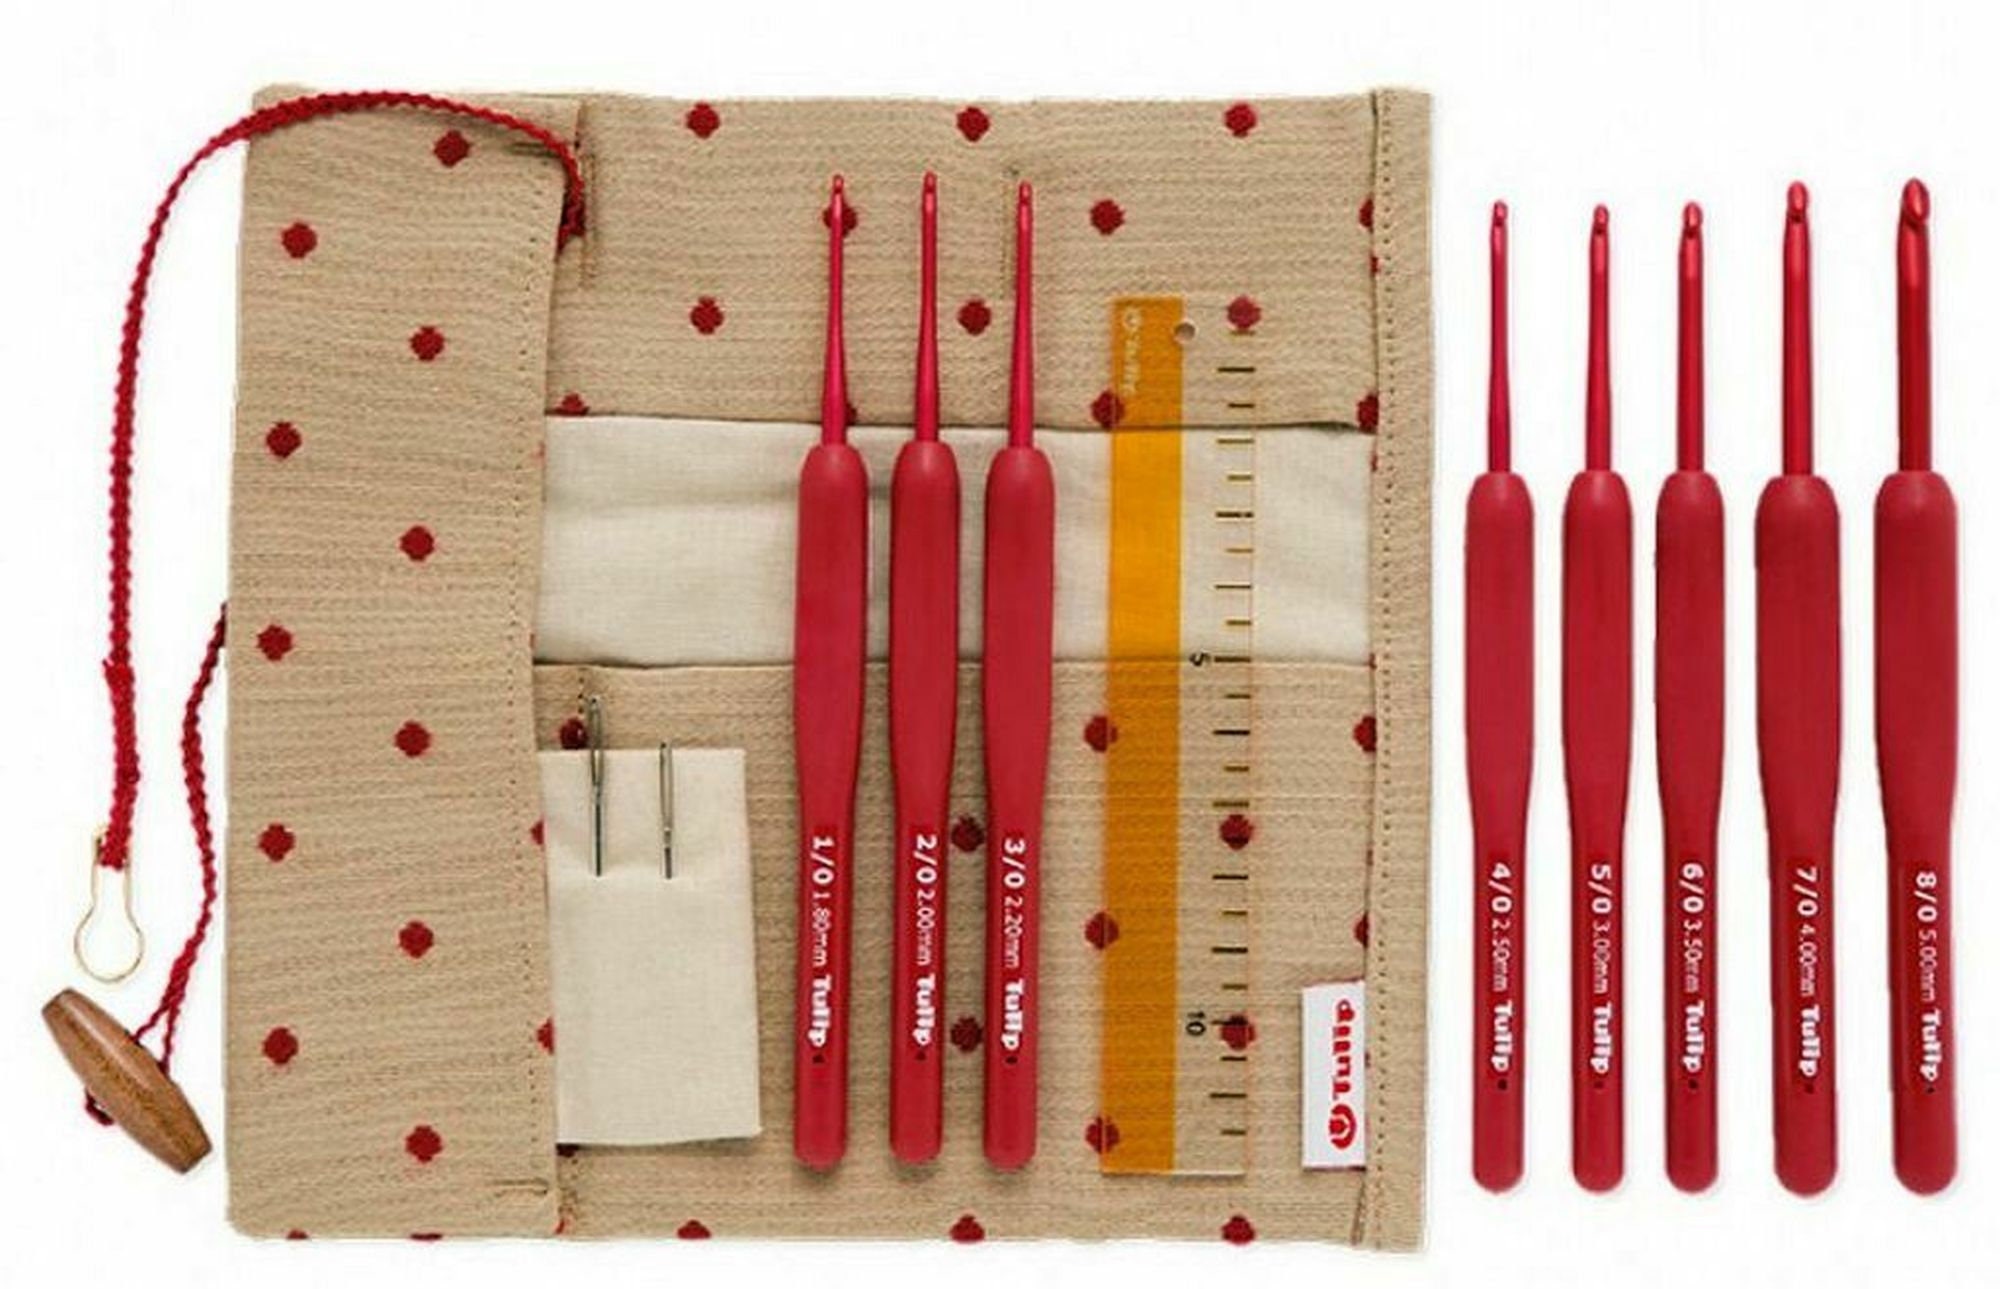 ETIMO Red crochet hook set Tulip with soft handle 1.80 - 5.00 mm TED001E